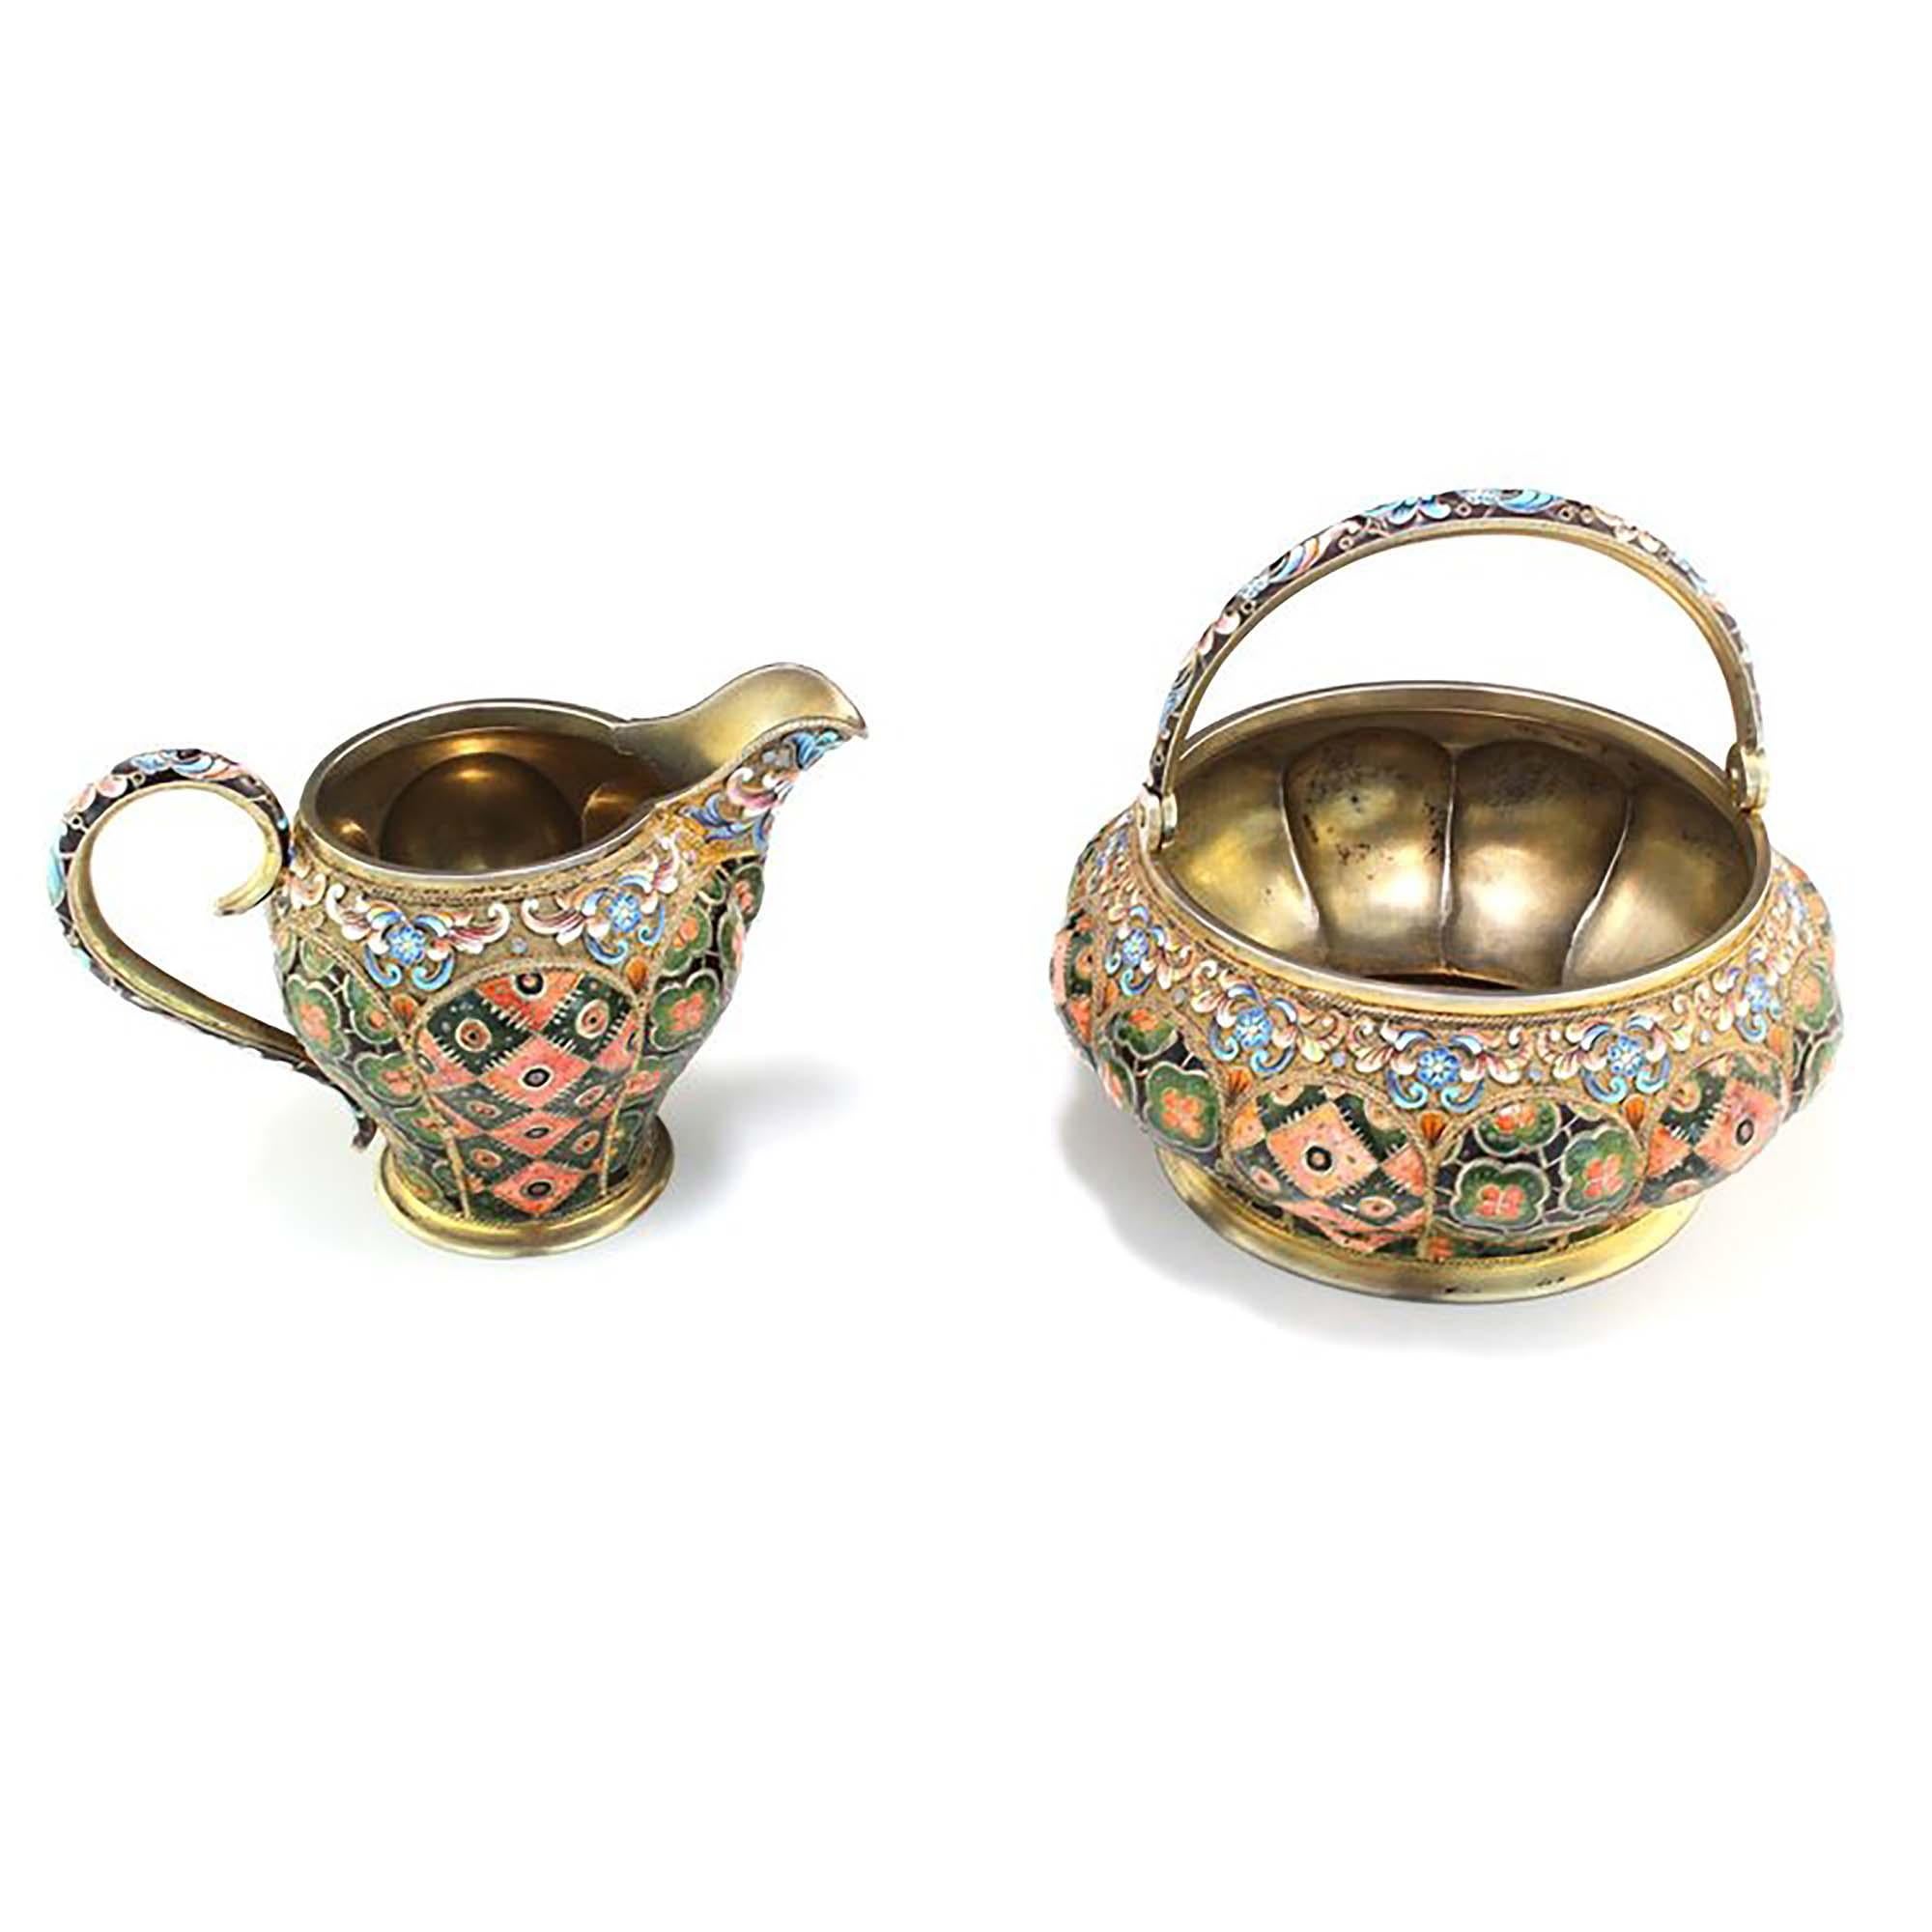 Russia Silver-Gilt and Cloisonné Enamel Sugar Bowl and Creamer For Sale 13